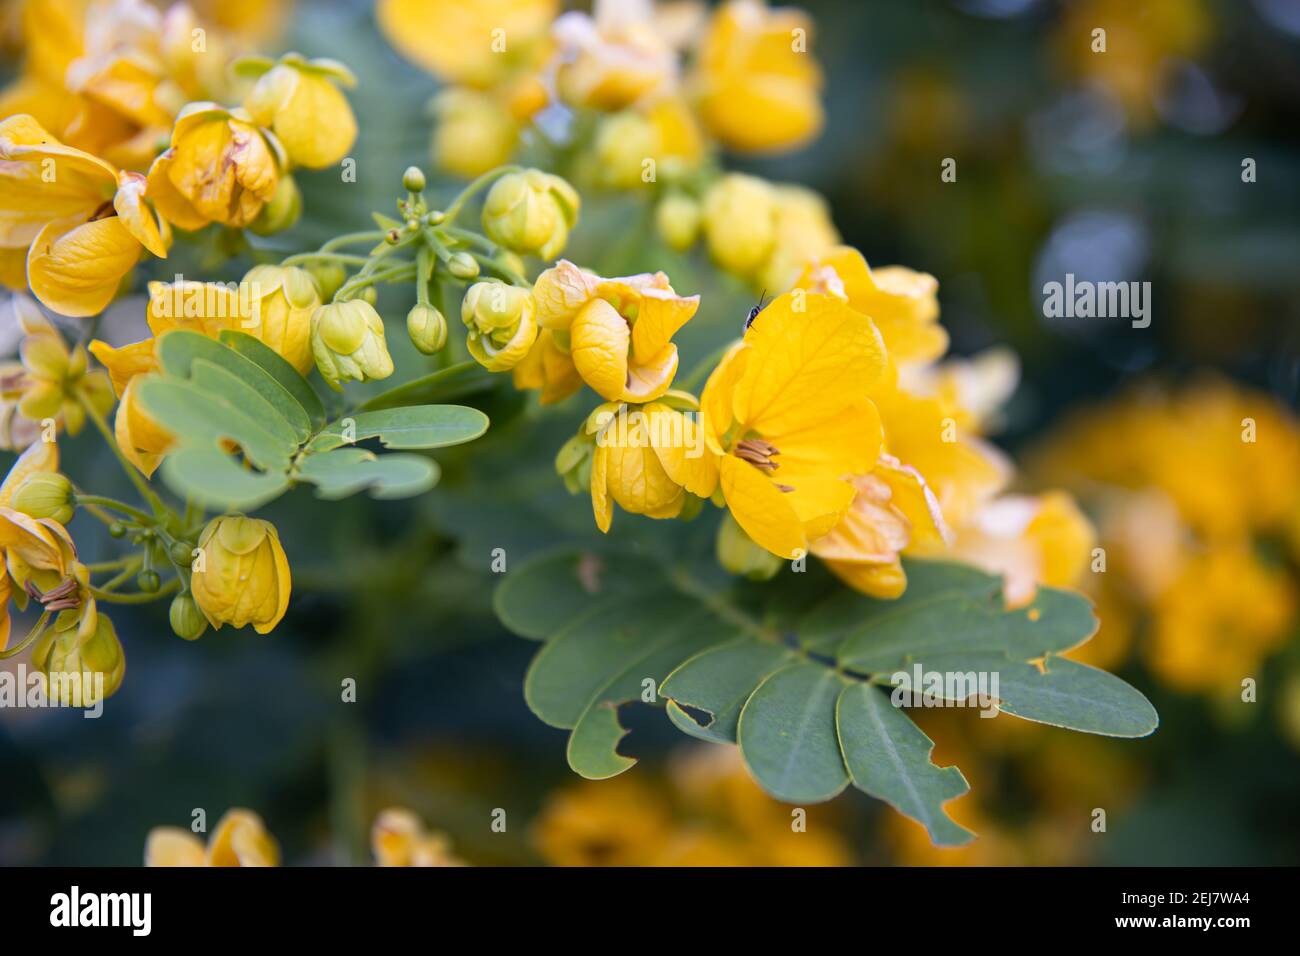 Small yellow flowers senna polyphylla desert cassia. close-up on a blurred background. Exotic plants of Egypt. Stock Photo